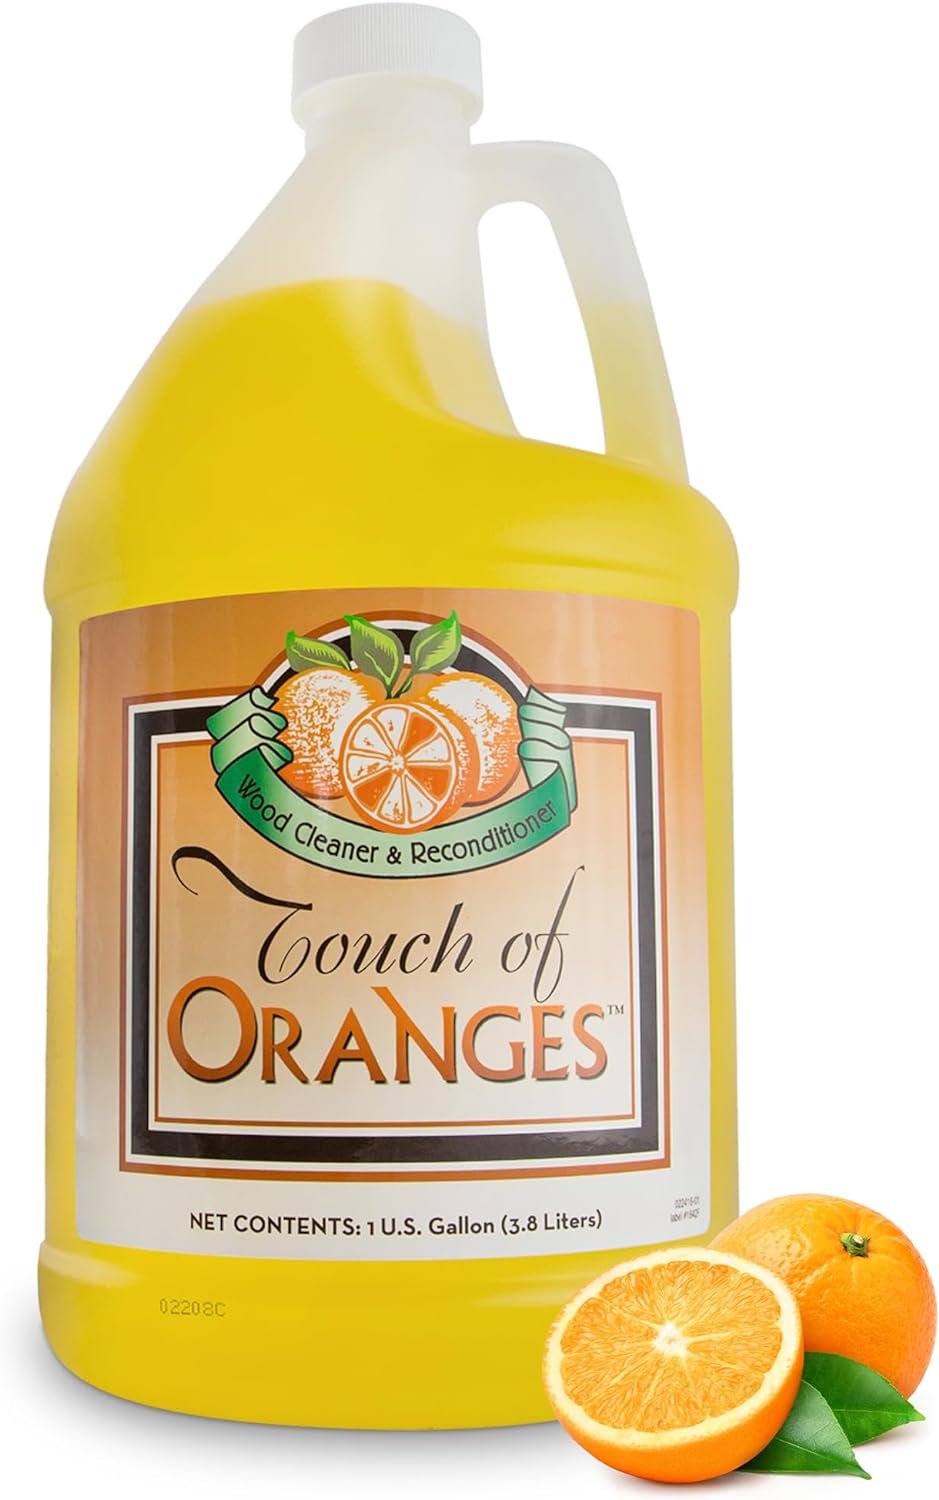 Wood Cleaner & Polish Spray Real Orange Oil Luster Finish, Clean Kitchen Cabinets, Hardwood Floor and All Wood, Restorer, Conditioner - (1 Gallon)